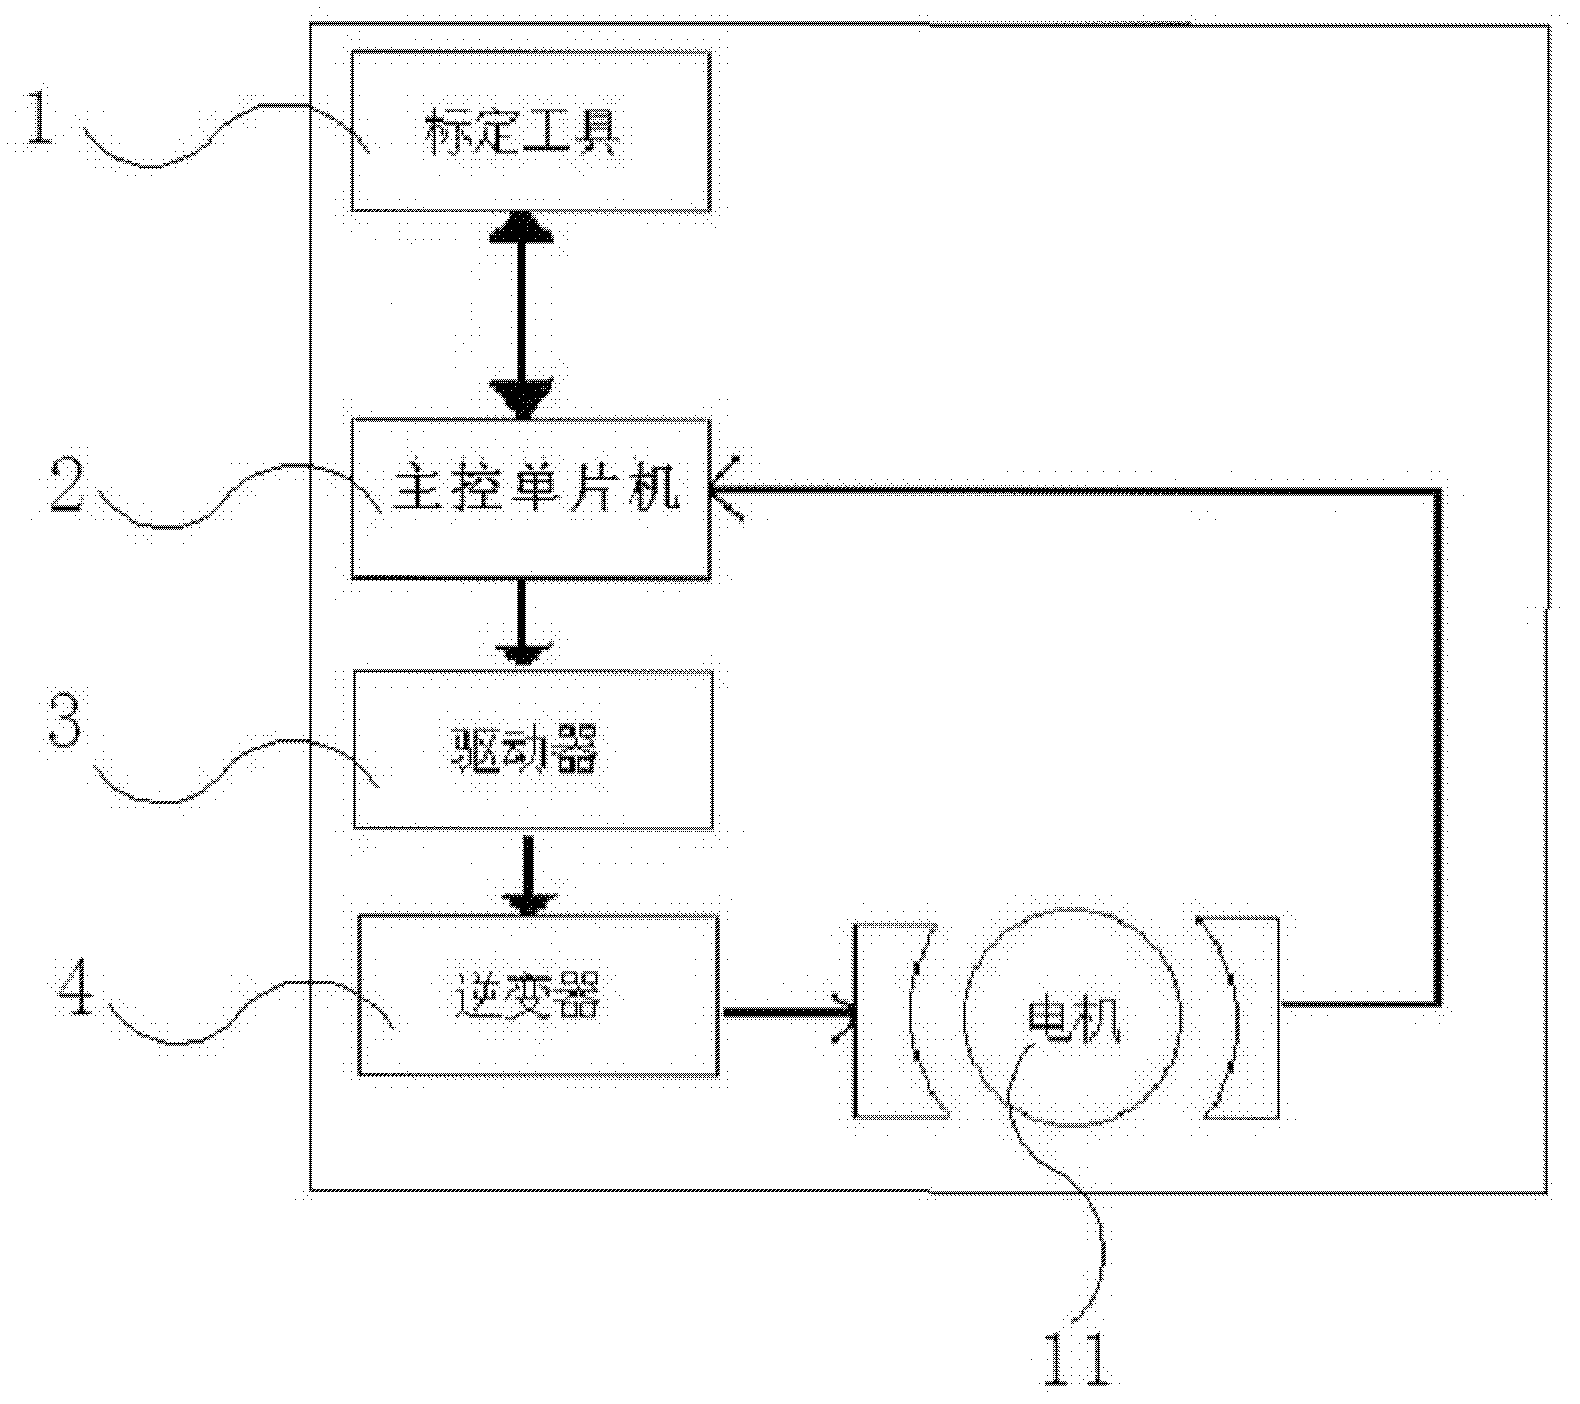 Method for calibrating parameters of motor controller without position sensor